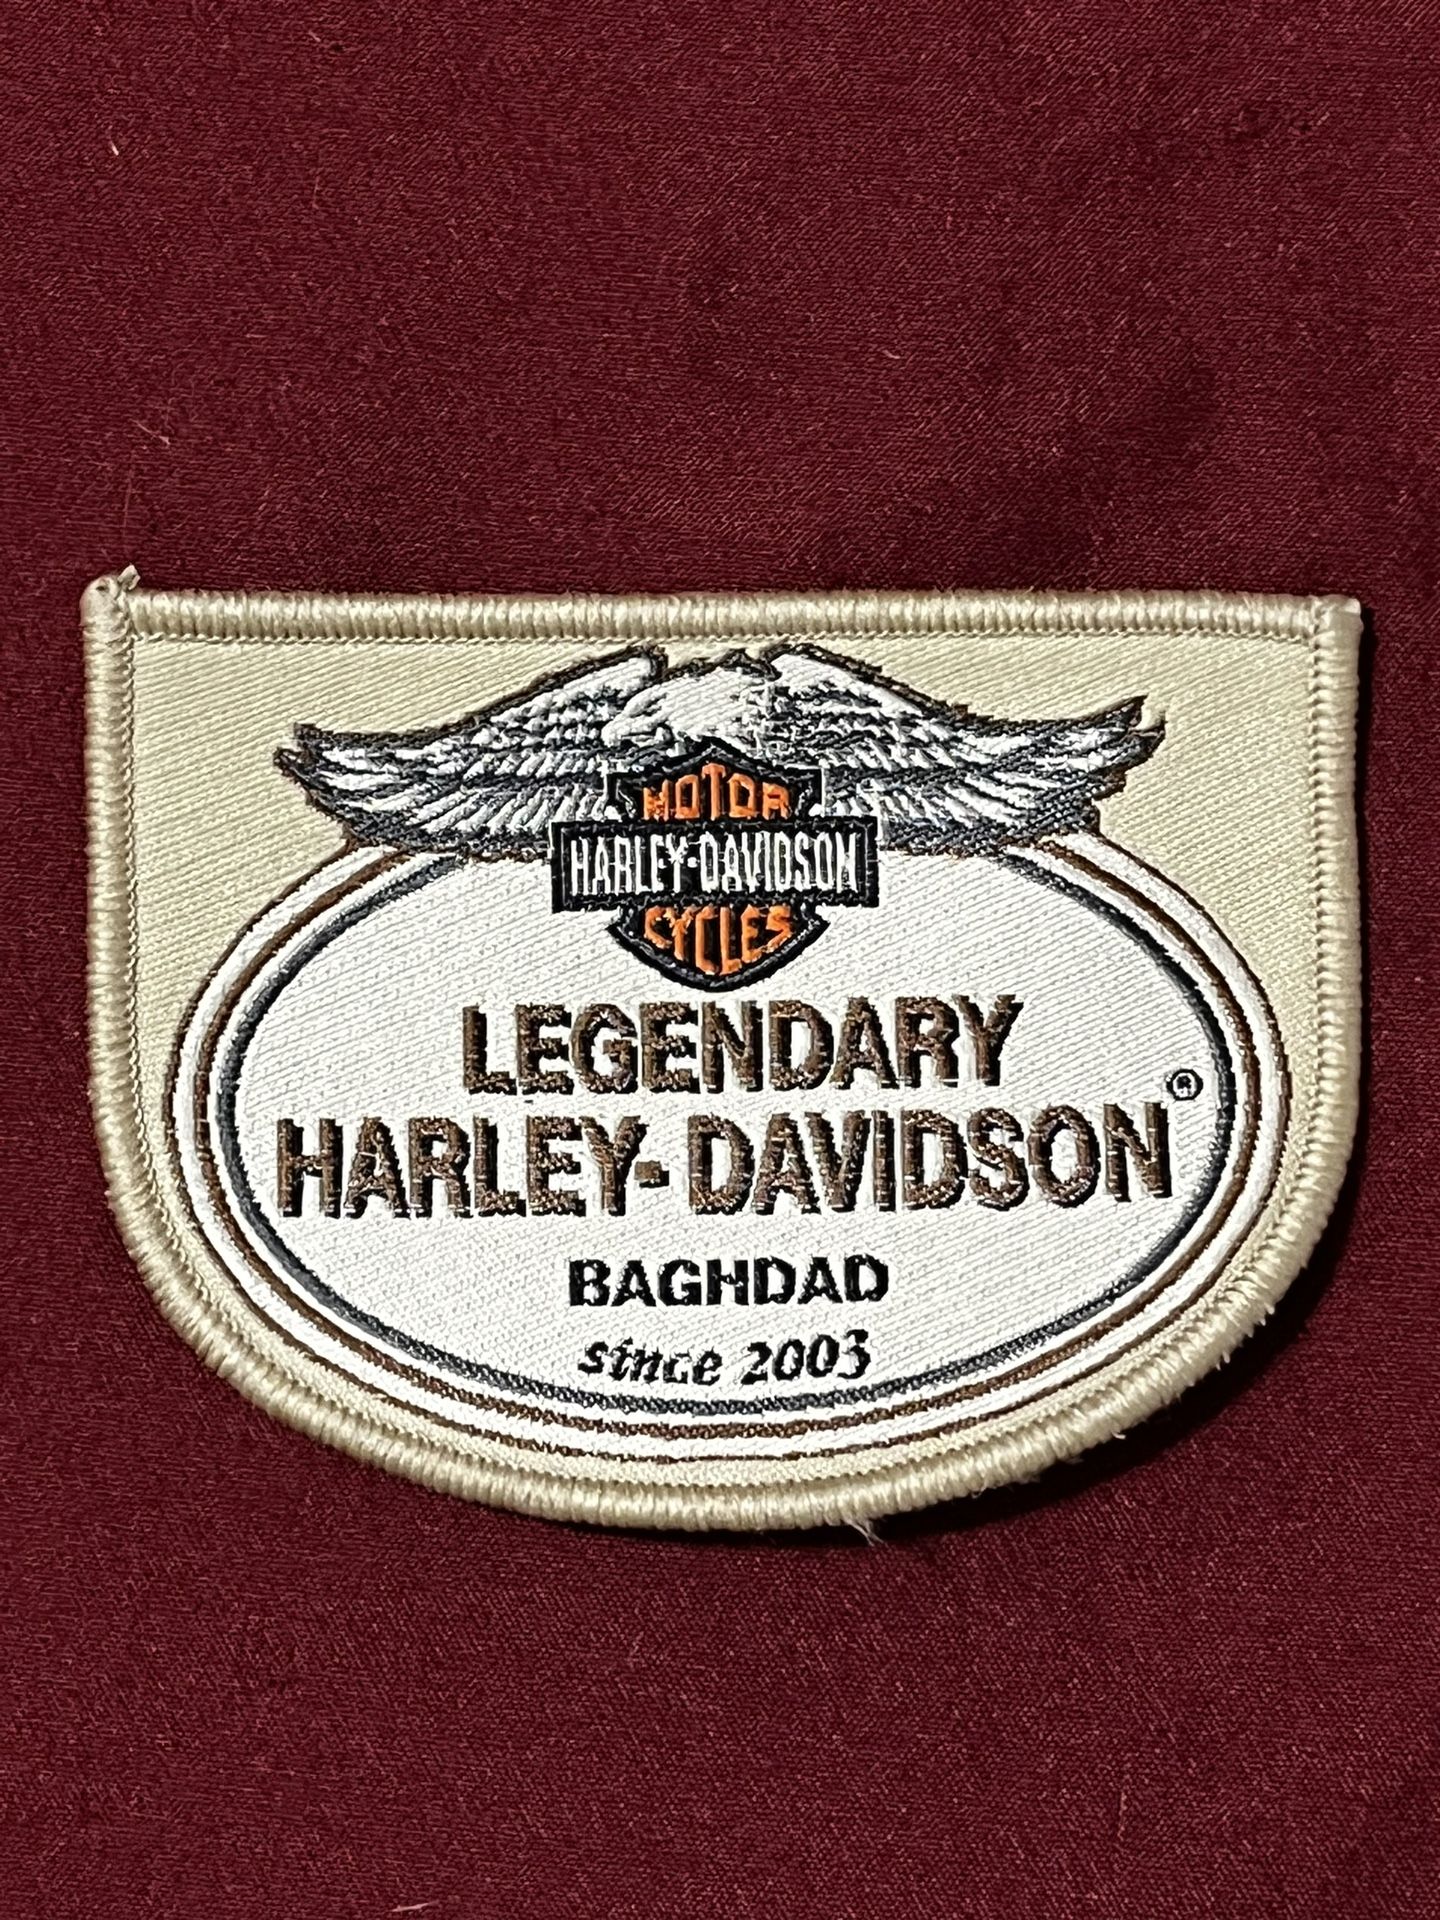 Legendary Harley Davidson  Baghdad since 2003 Cloth Patch, Theatre Made